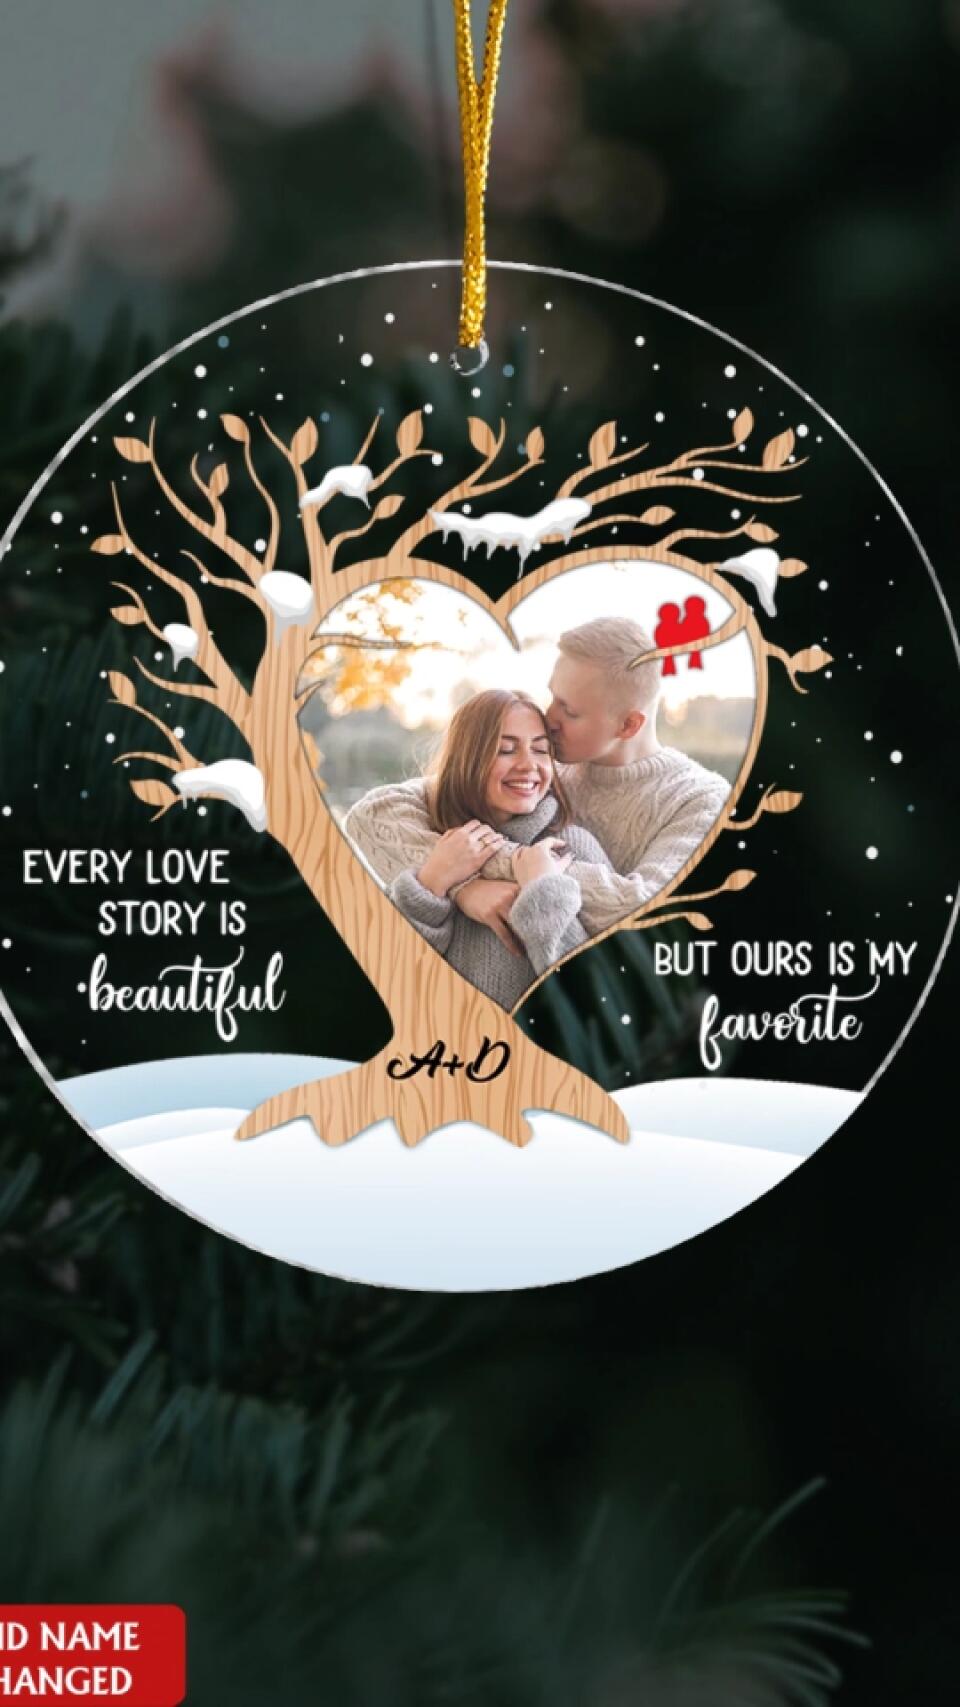 Our Love Story Is My Favourite Ornament - Personalized Christmas Ornament For Couple - Valentines Day Gift - Personalized Love Acrylic Ornament